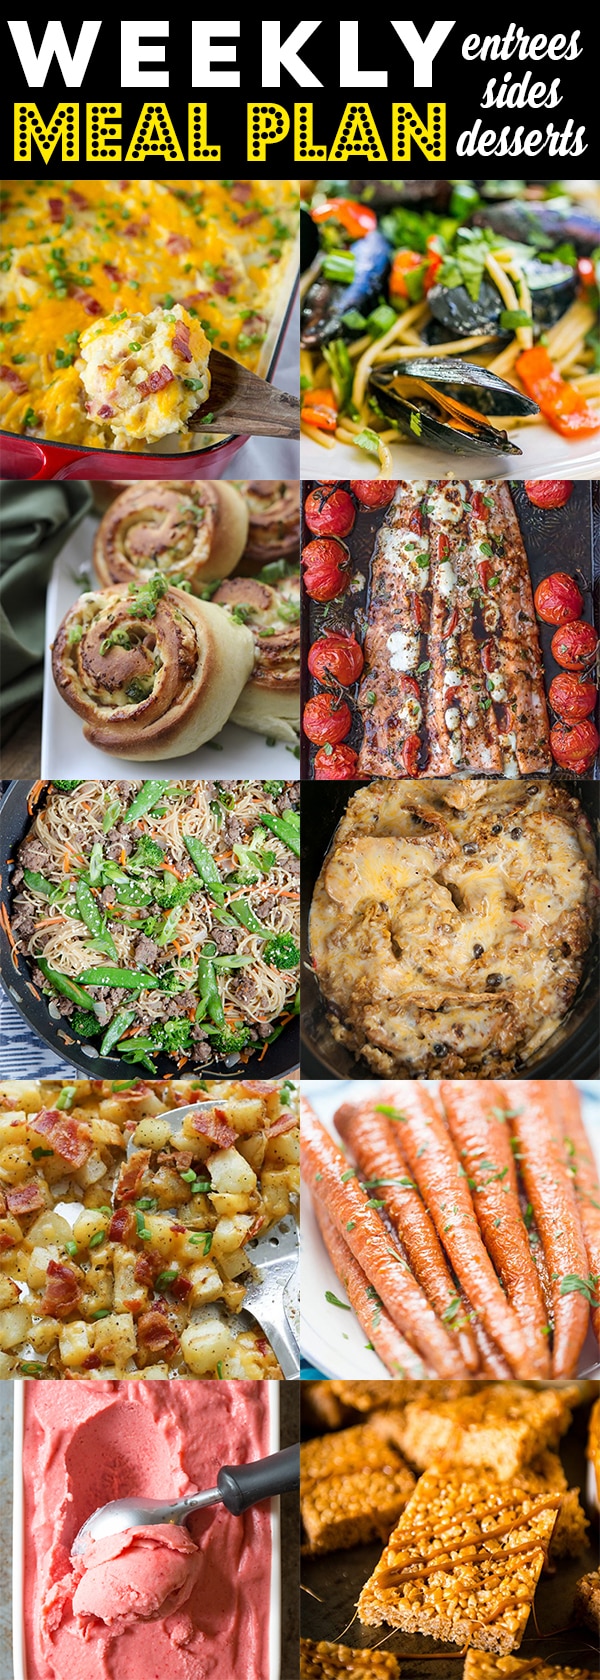 Weekly Meal Plan #87 - 10 recipes from 10 great food bloggers